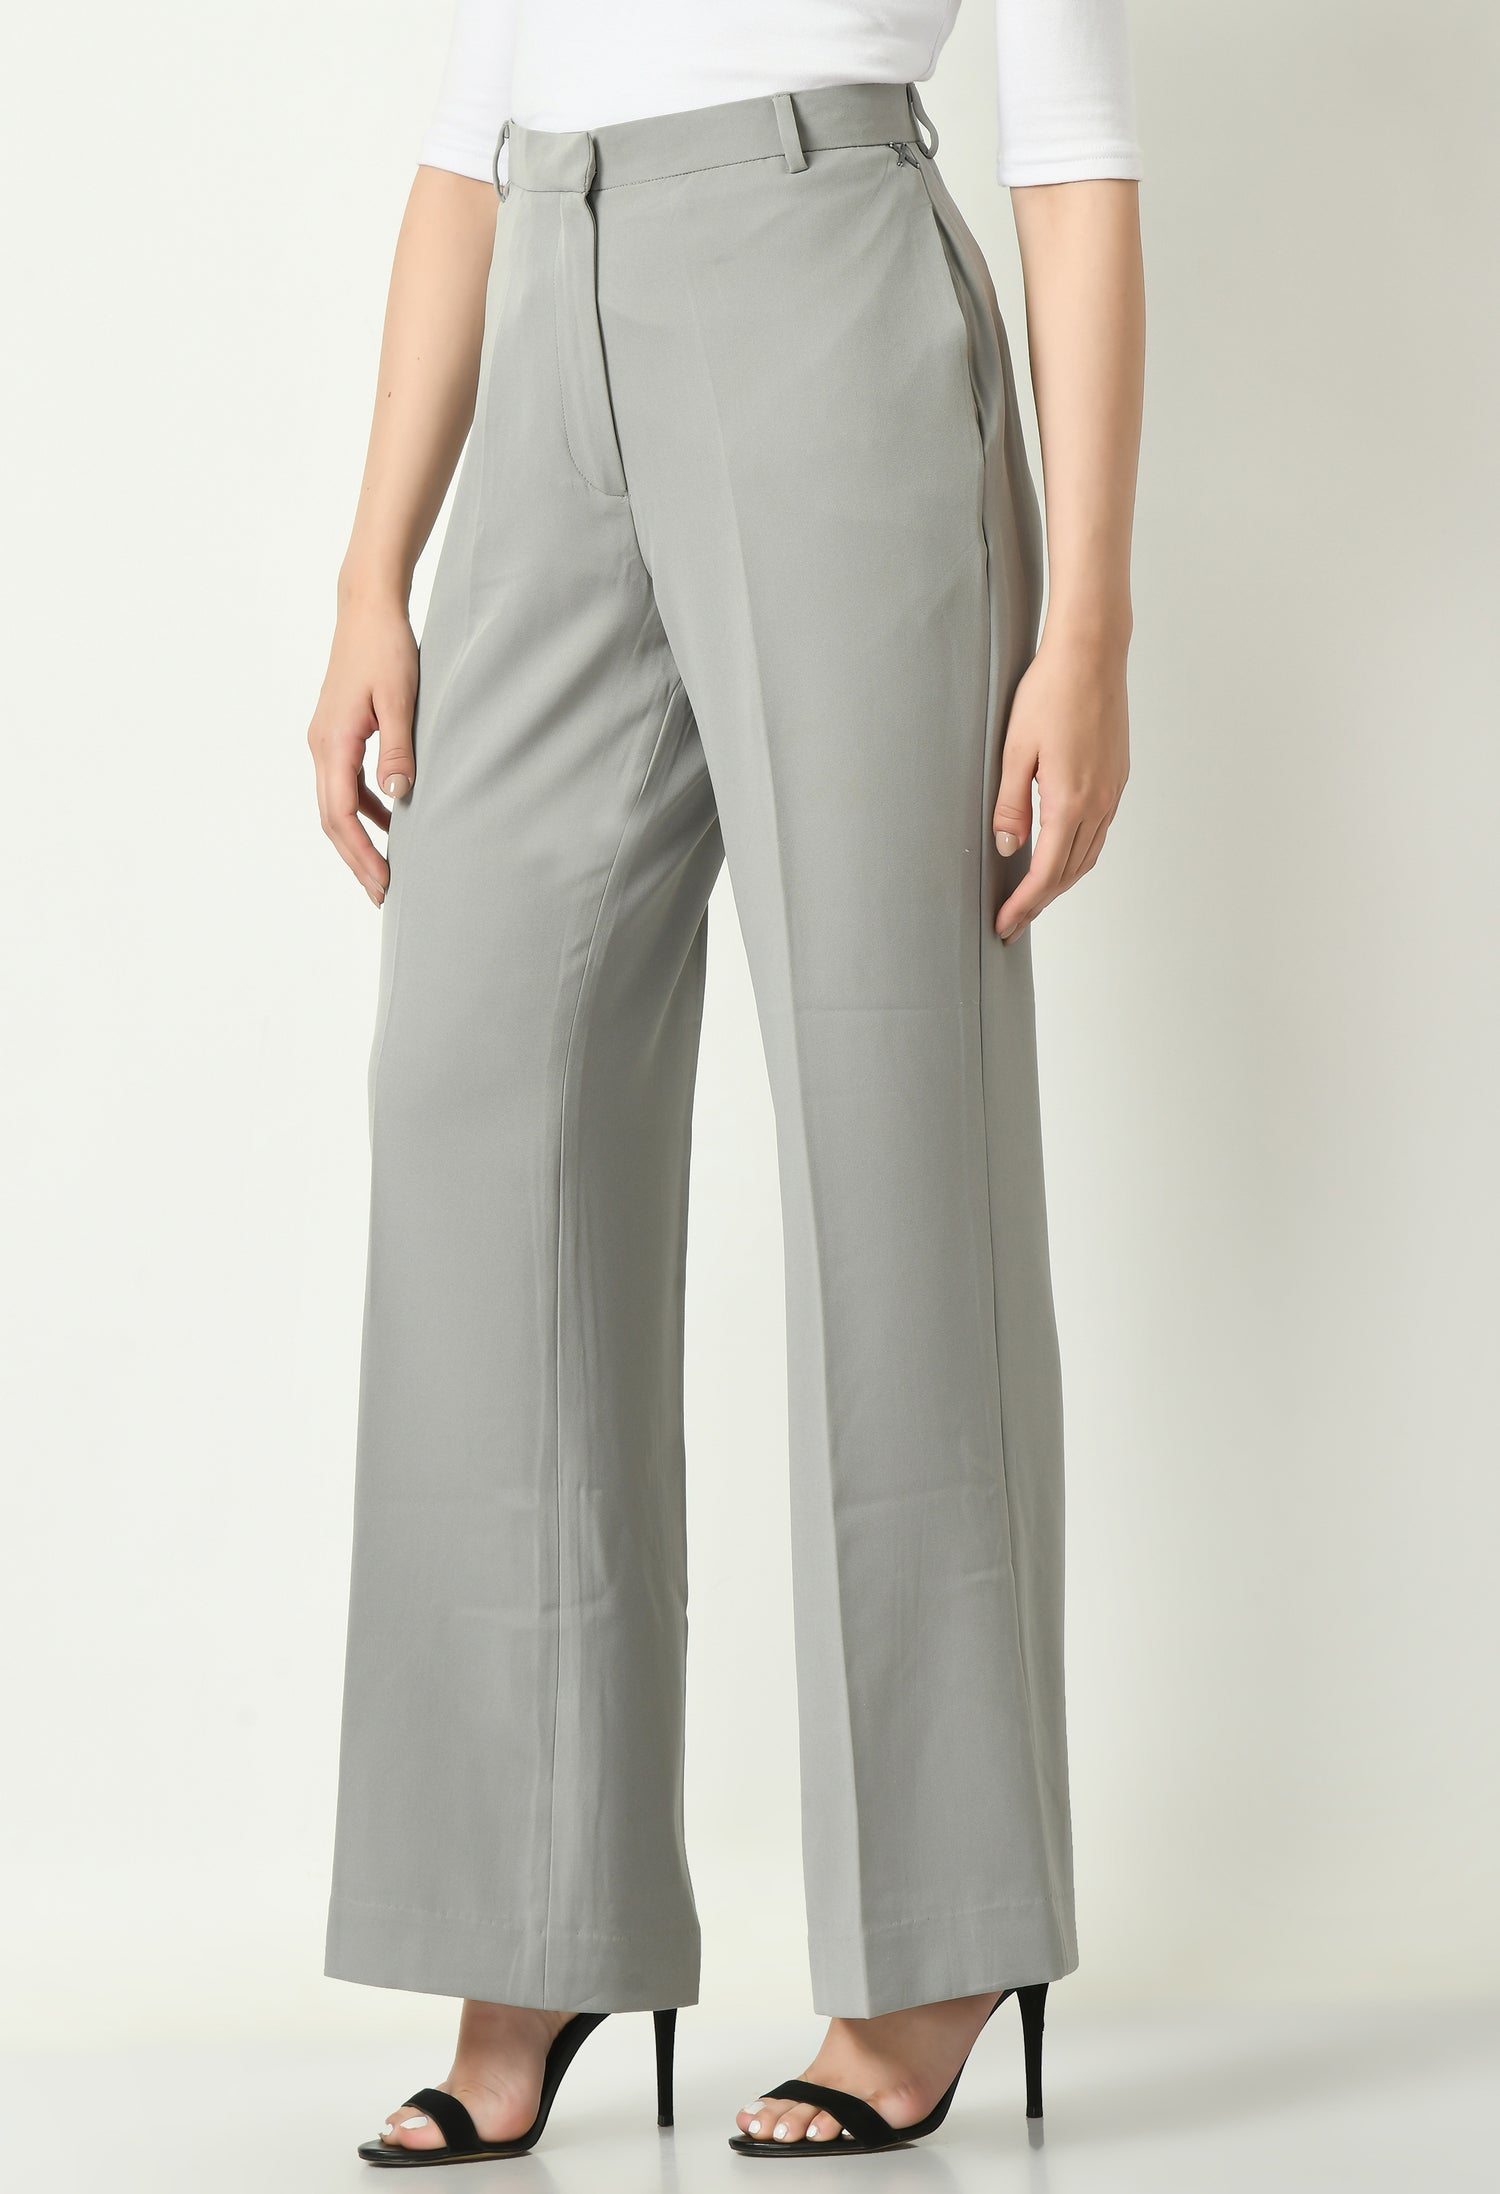 Exude Aspiration Sleeveless Blazer with Bootcut Trousers (Grey)